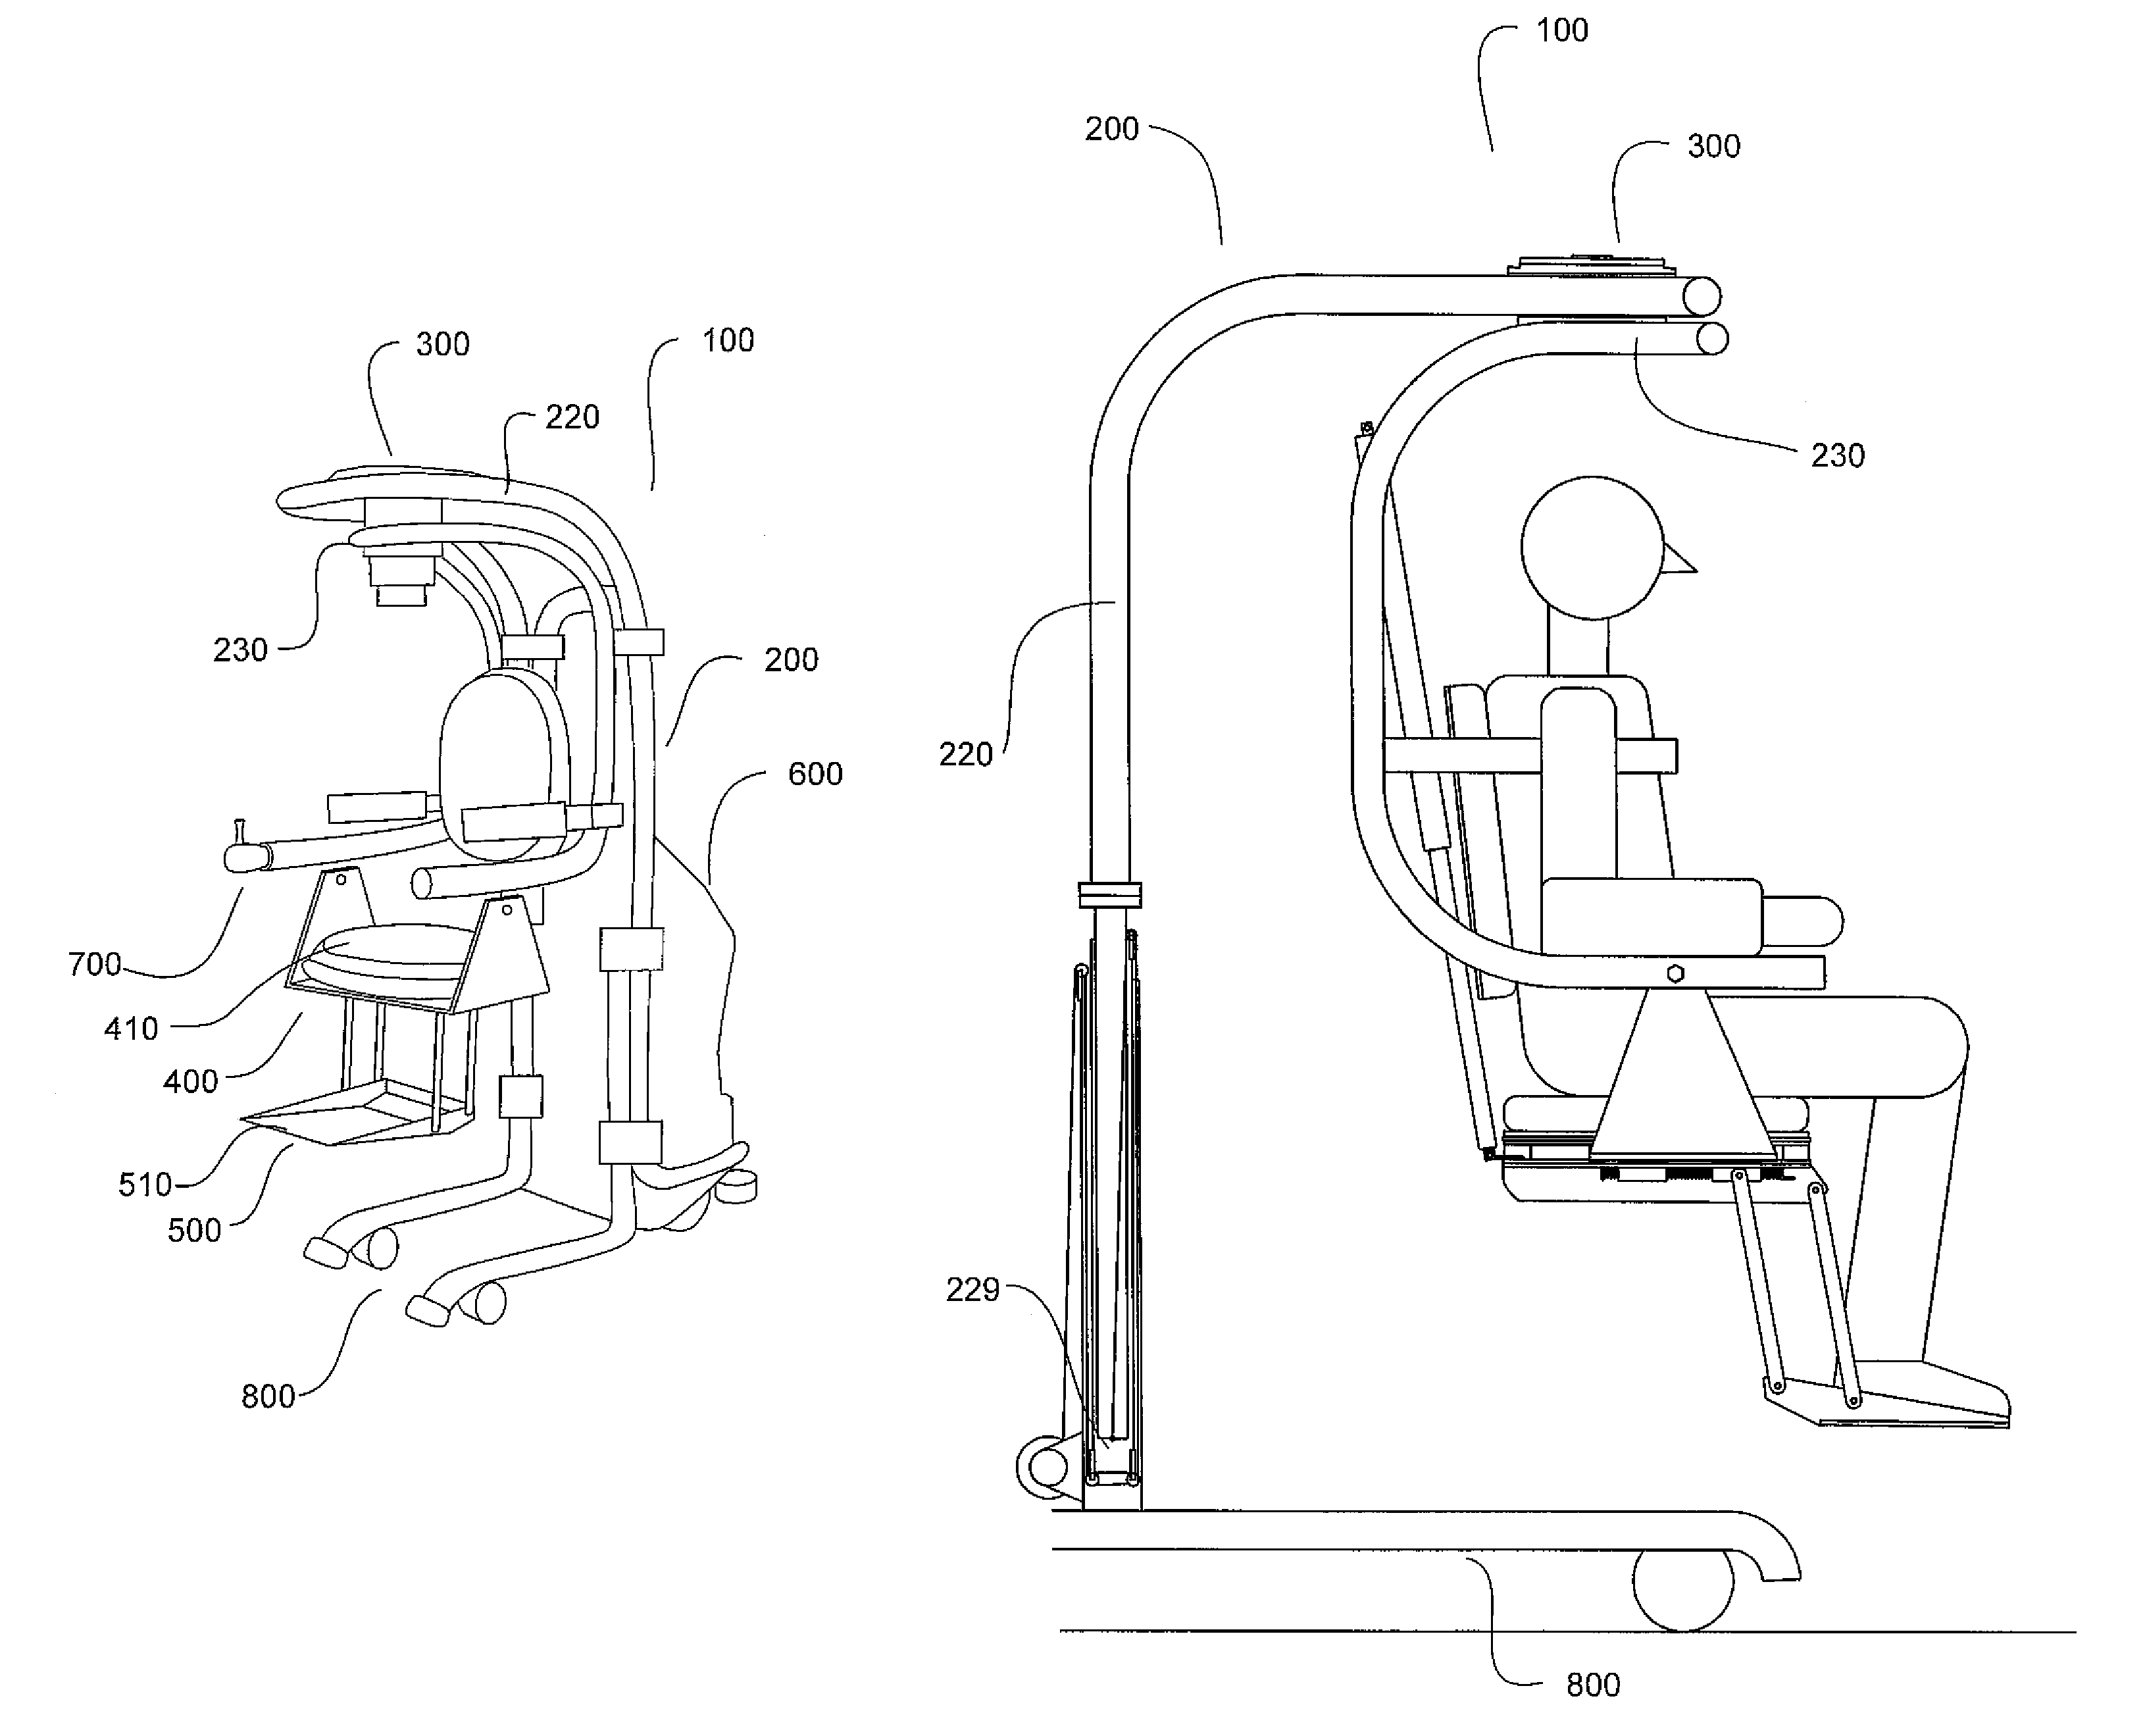 Home lift position and rehabilitation (HLPR) apparatus